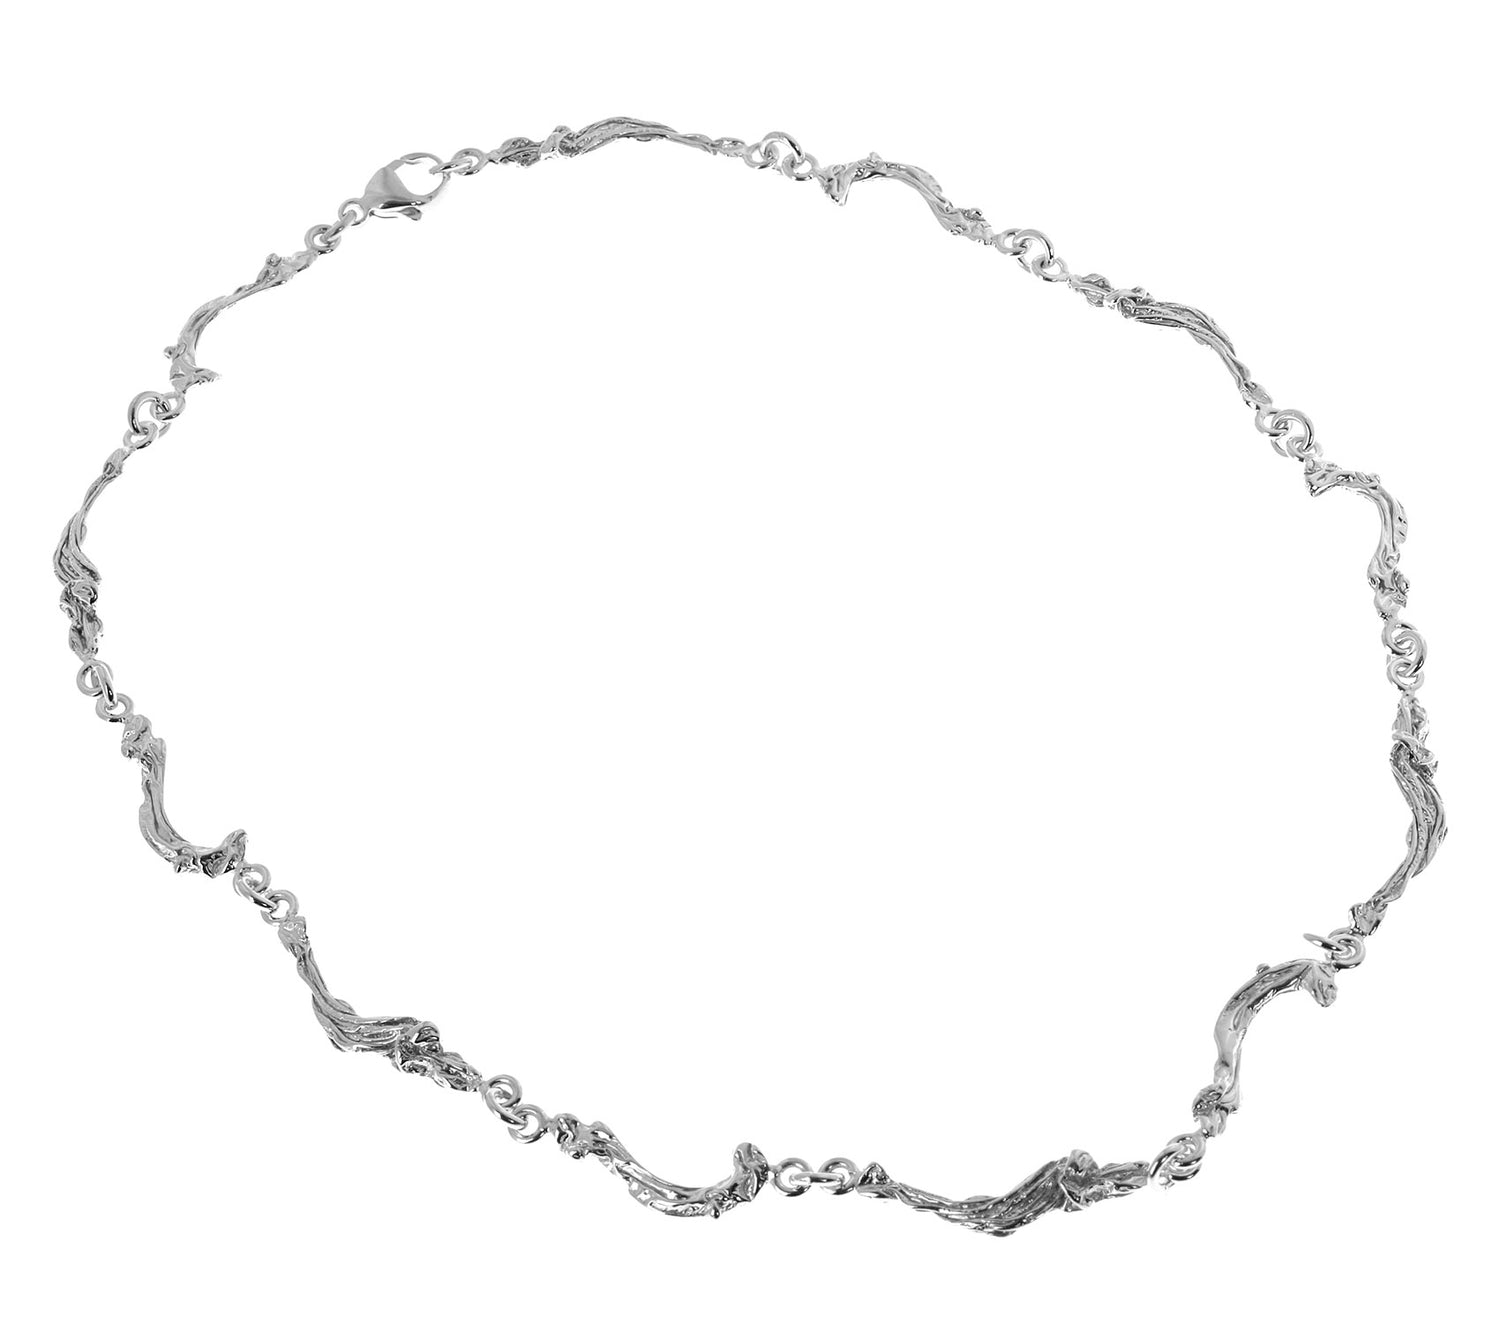 HAVET (The Sea) necklace